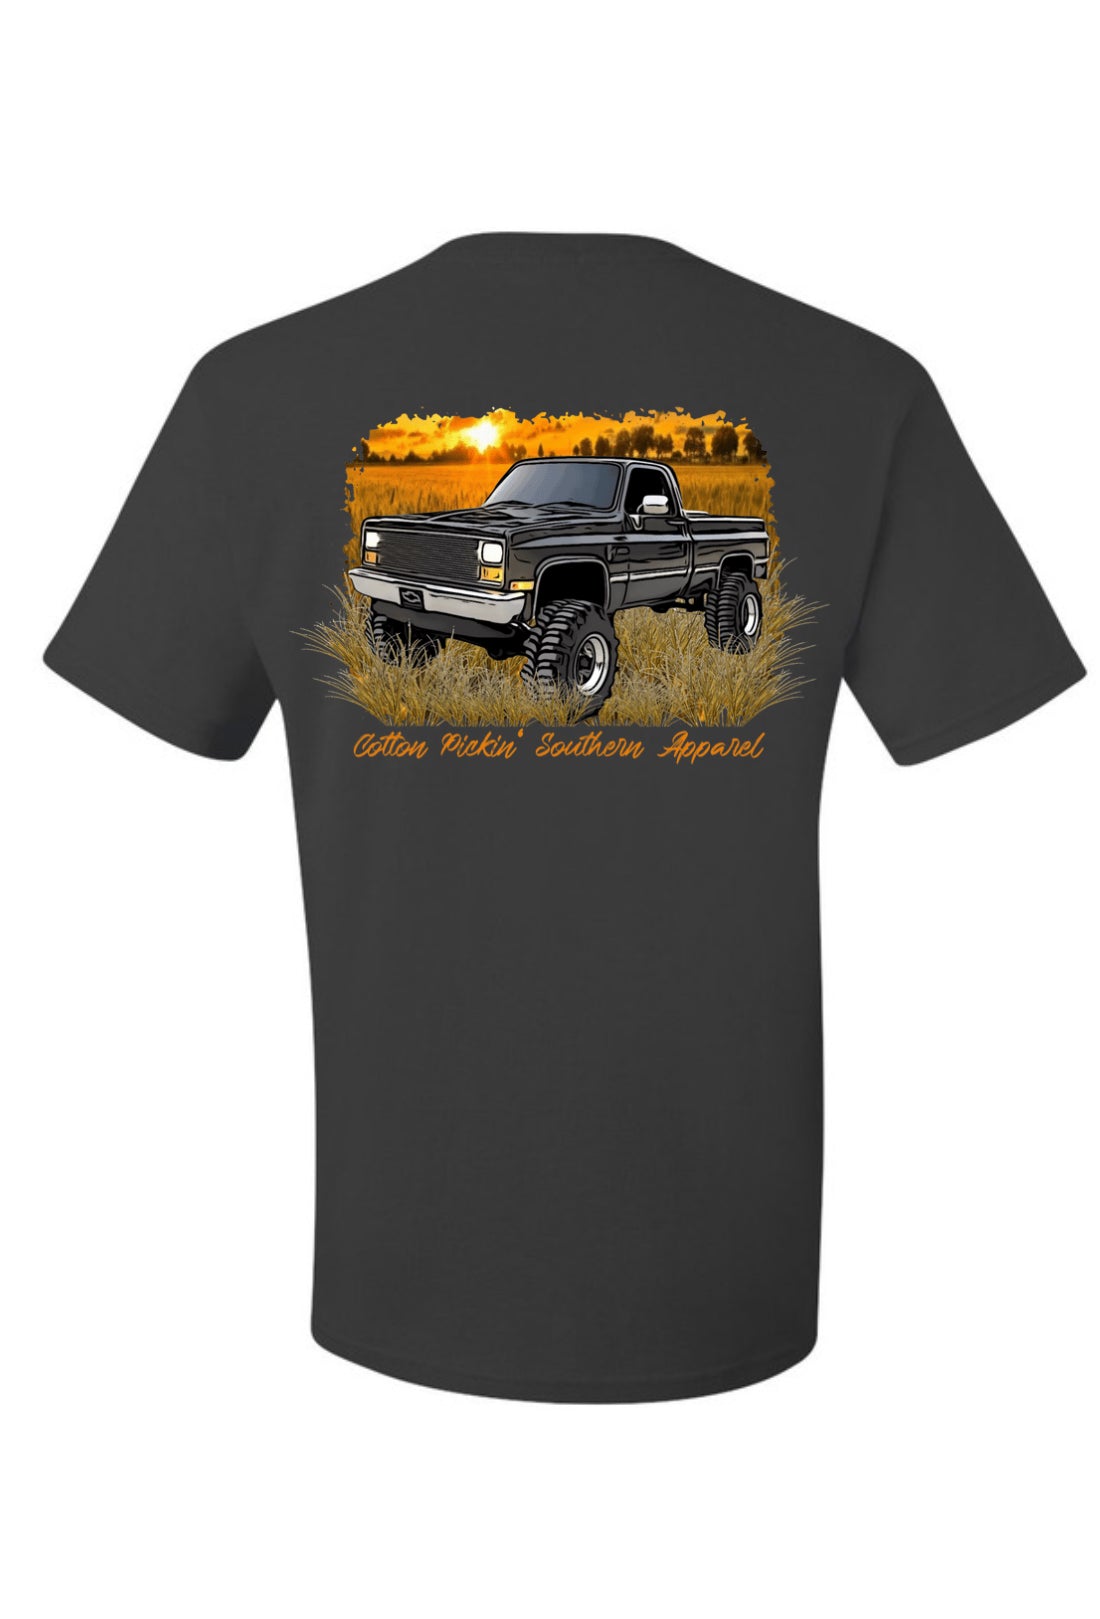 Lifted K10 Cotton Pickin’ Southern Apparel